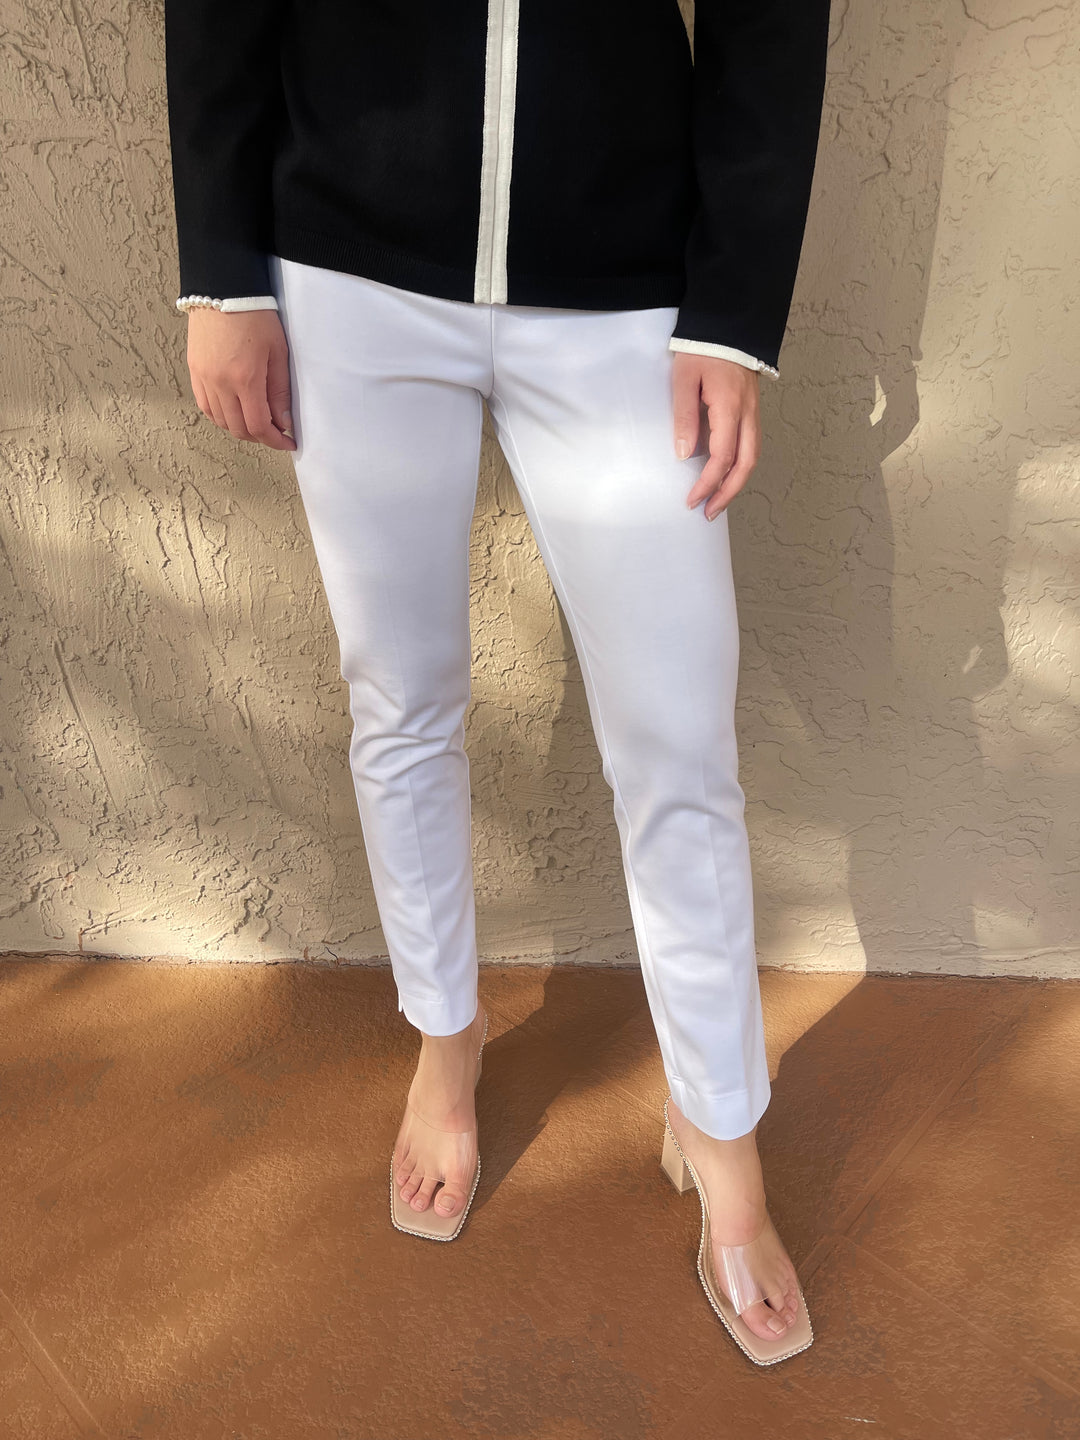 Peace of Cloth Annie Pant 29" - Paramount Knit - White